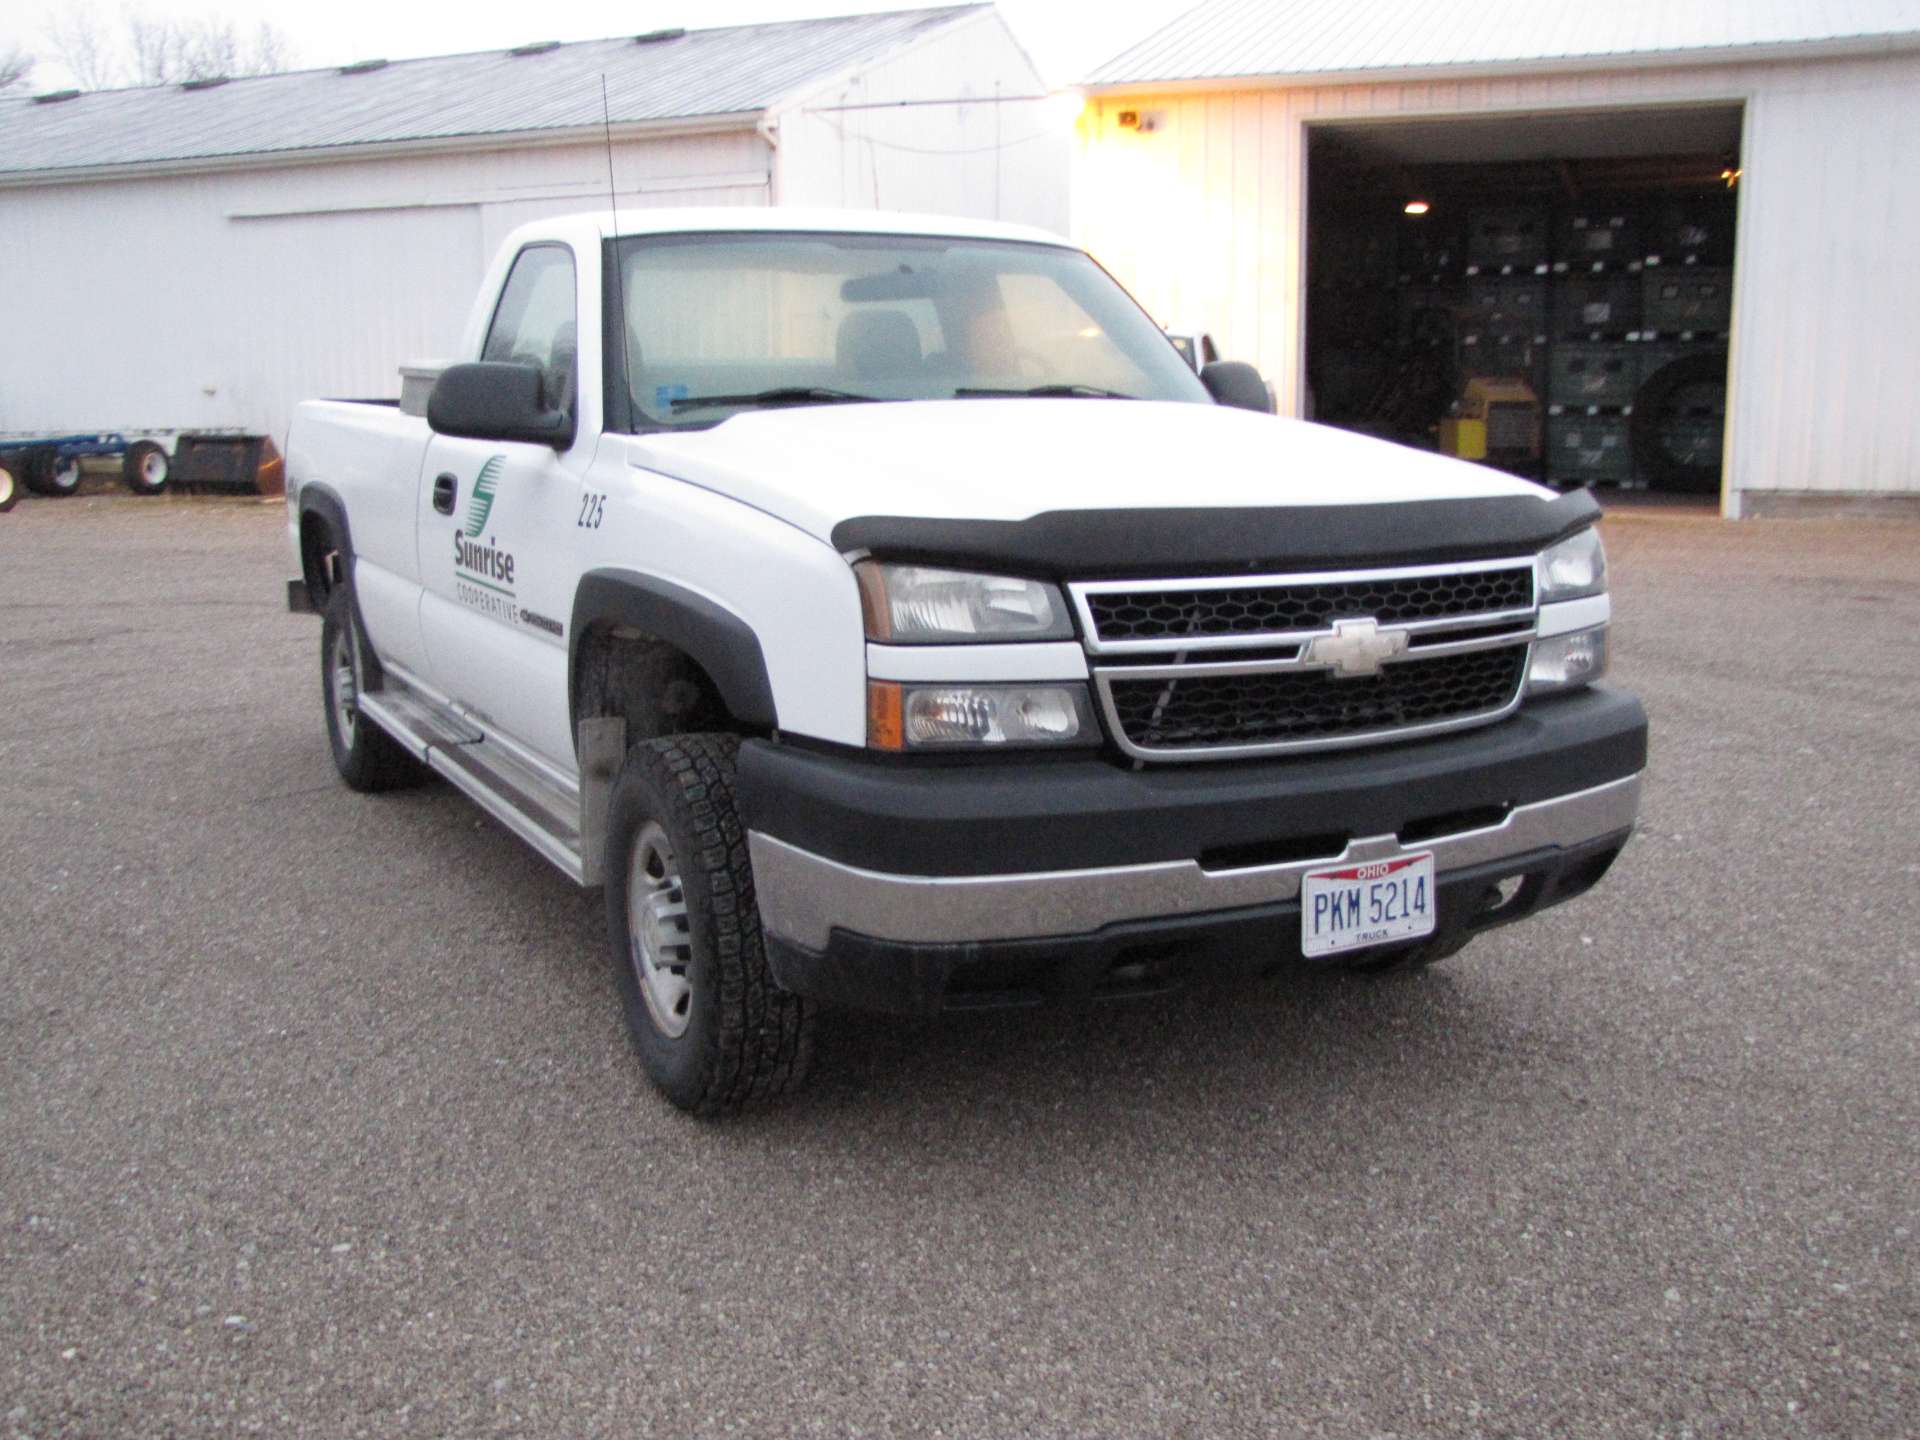 2006 Chevy 2500 HD pickup truck - Image 14 of 65